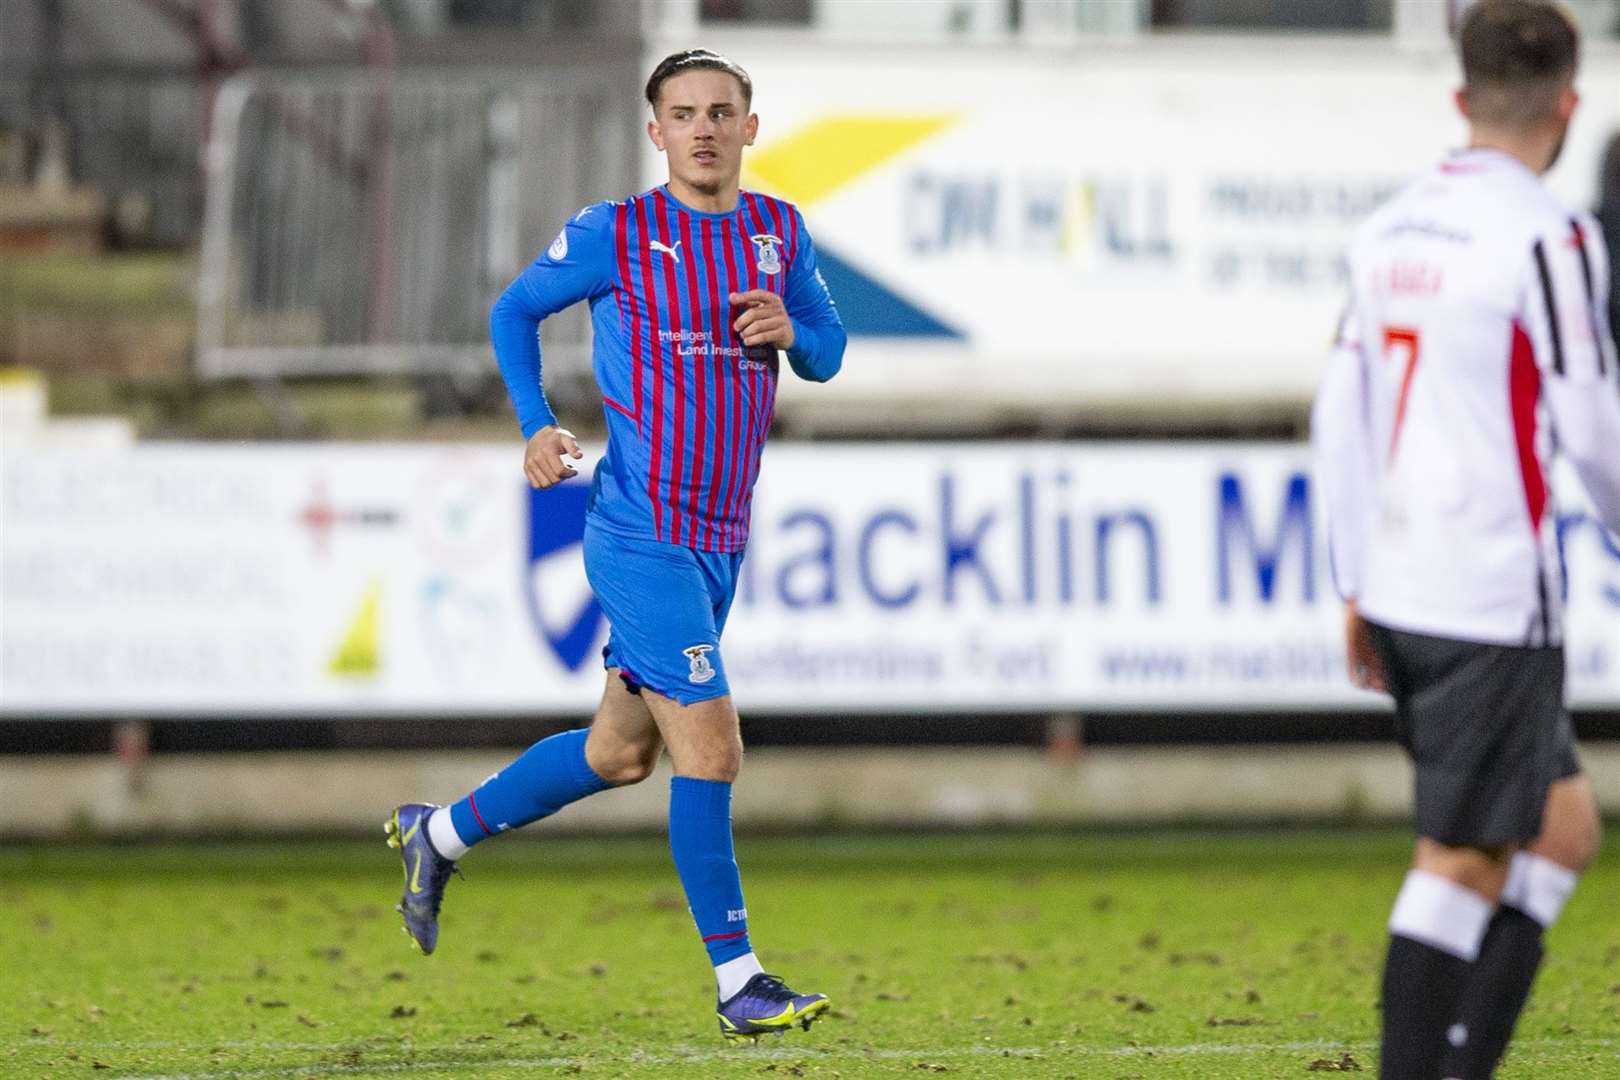 Picture - Craig Brown. Dunfermline(1) v Inverness CT(1). 22.01.22. ICT’s Logan Chalmers makes his debut appearance from the subs bench.